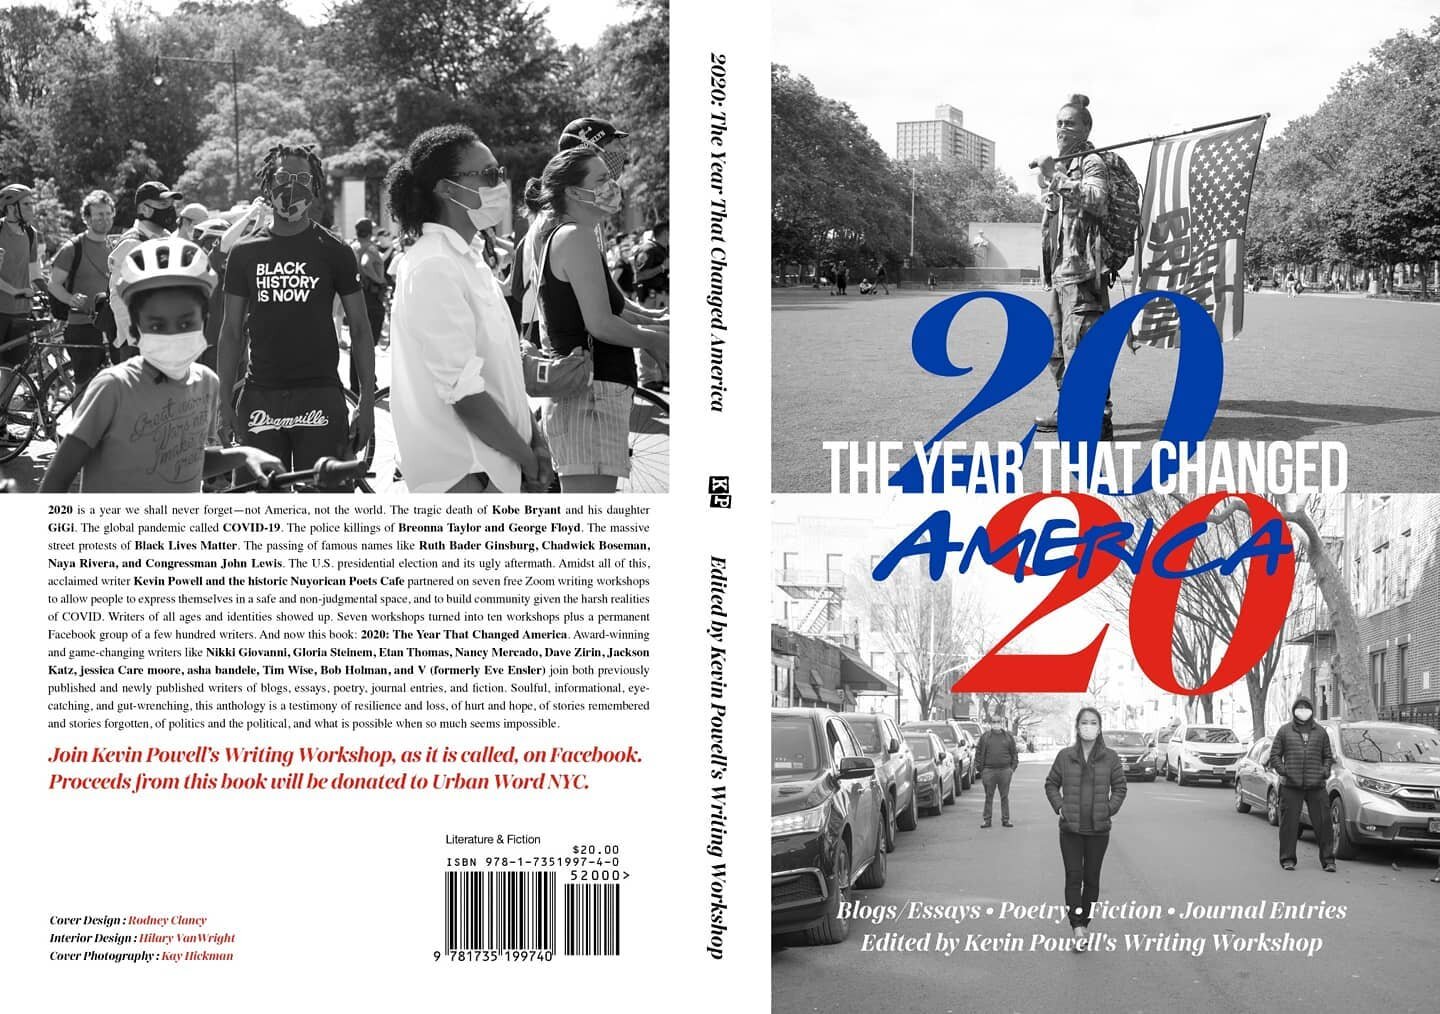 SUPER GRATEFUL to have my work included in @kevinpowellinbrooklyn latest anthology now available on Amazon!!! #linkinbio

MUST-HAVE NEW BOOK! 2020: The Year That Changed America, Edited by Kevin Powell&rsquo;s Writing Workshop. 164 diverse writers&md